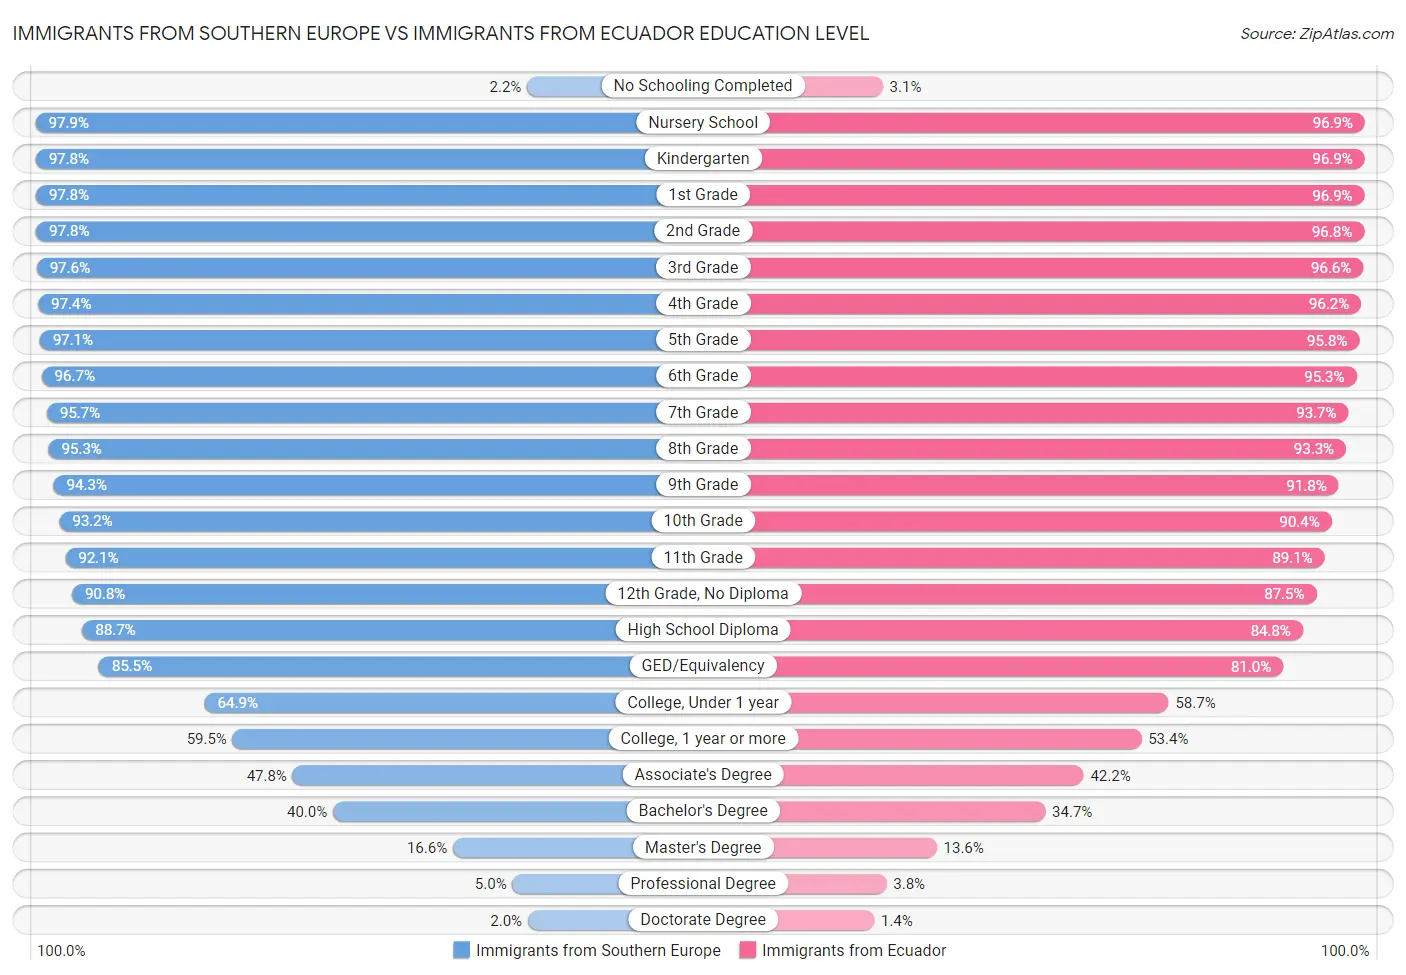 Immigrants from Southern Europe vs Immigrants from Ecuador Education Level